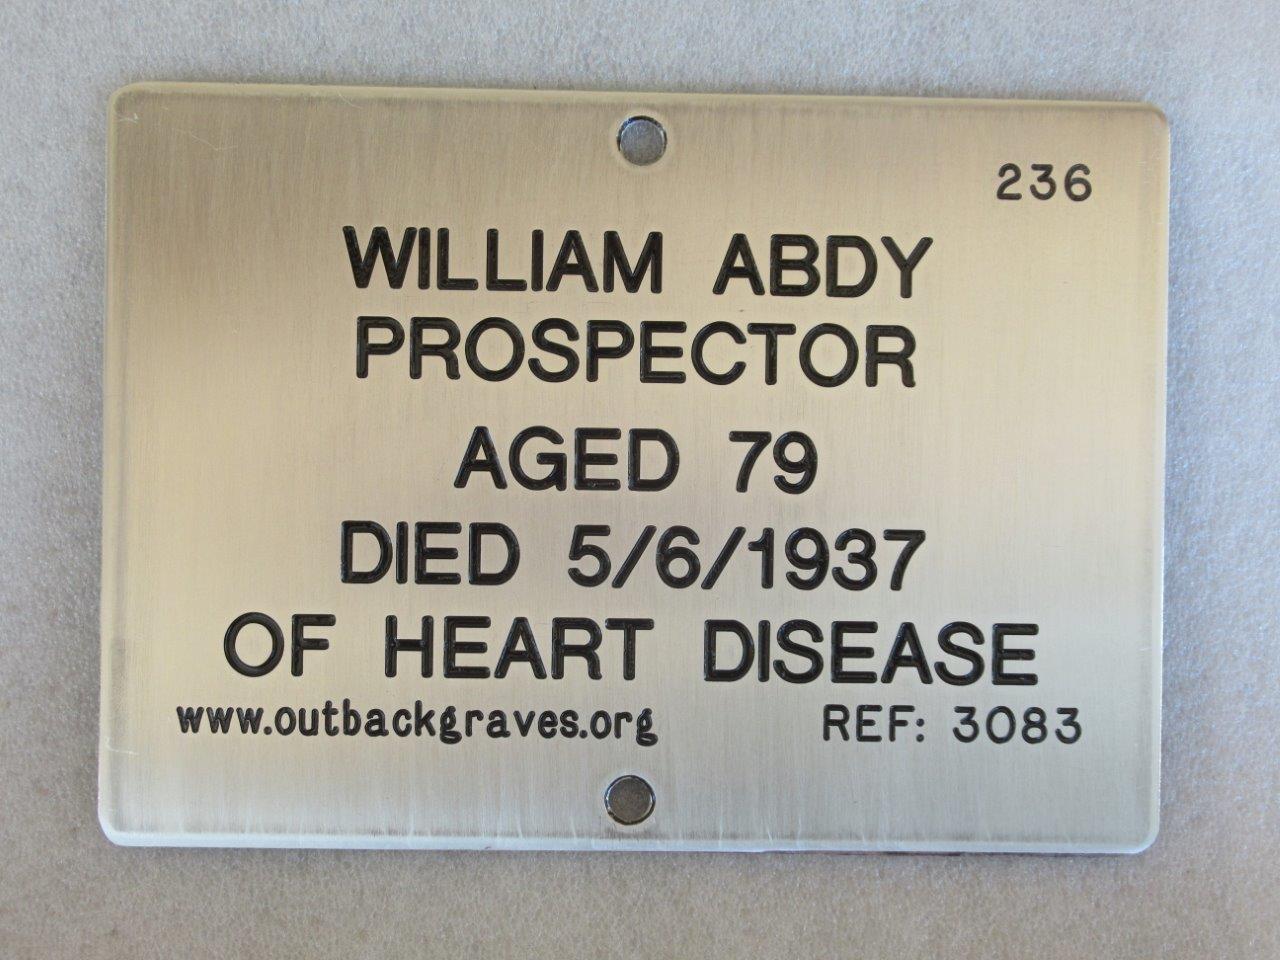 This is a photograph of plaque number 3083 for WILLIAM ABDY at WILUNA